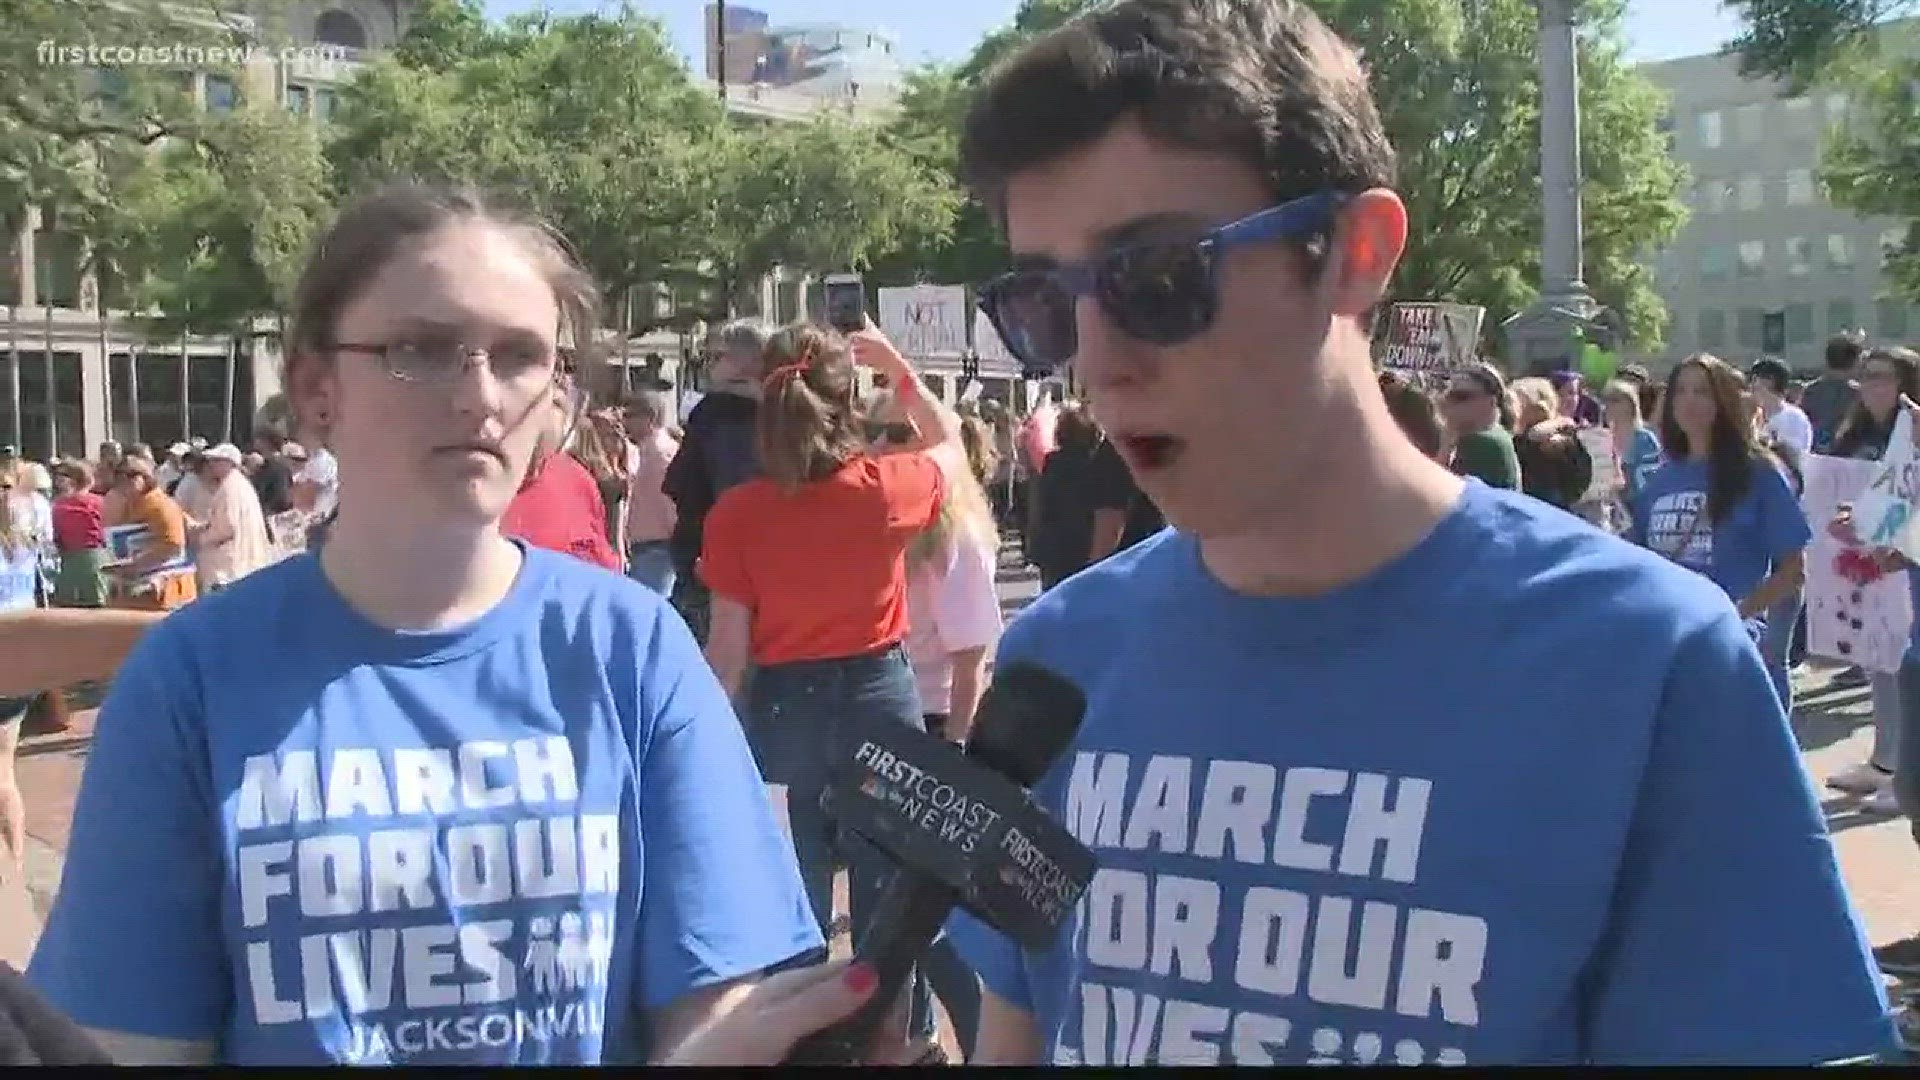 Nearly 1,000 people showed up to show their support for the March for Our Lives rally.